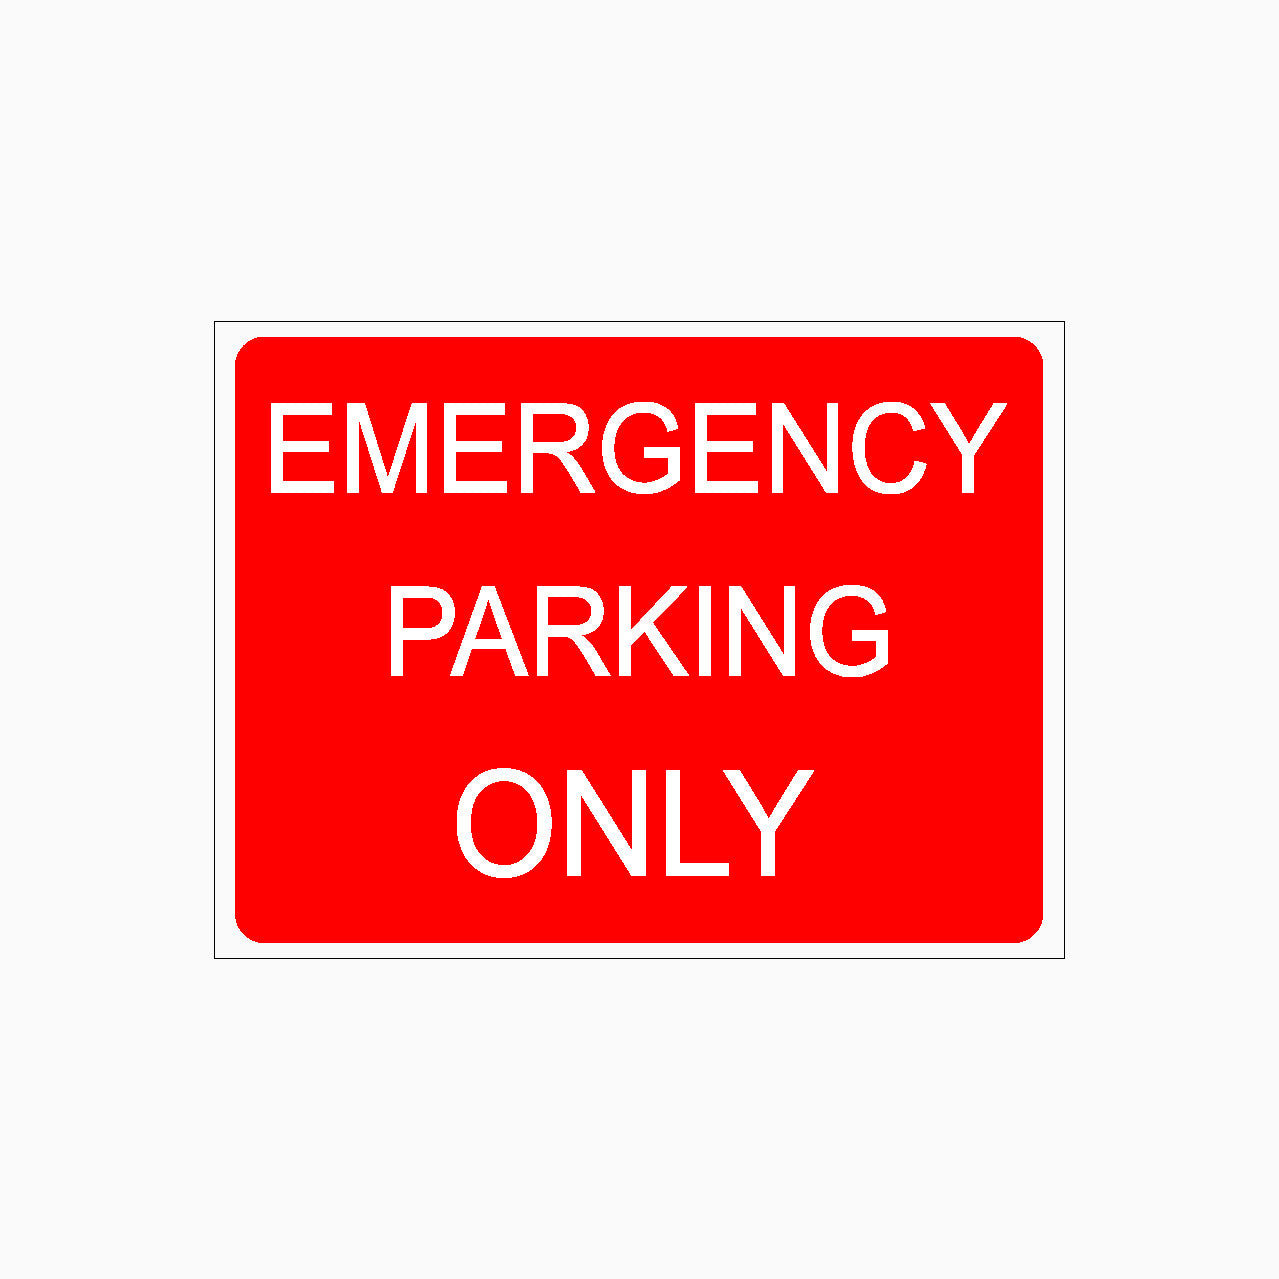 EMERGENCY PARKING ONLY SIGN